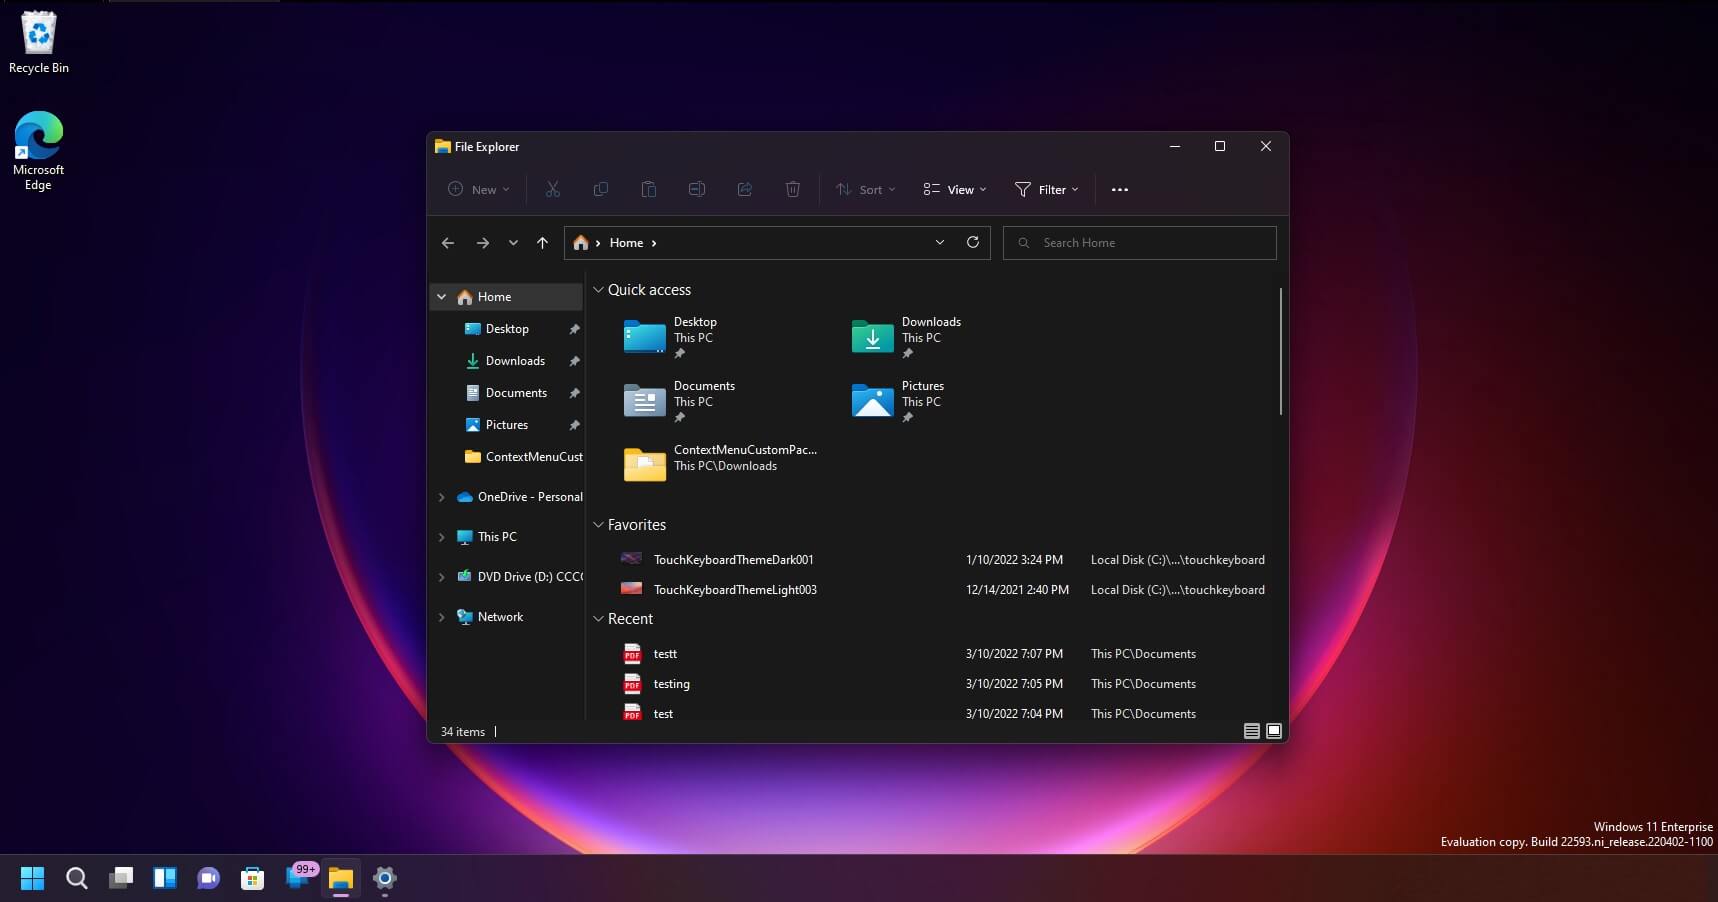 Windows 11 Build 22593 hands on: File Explorer updated with new changes